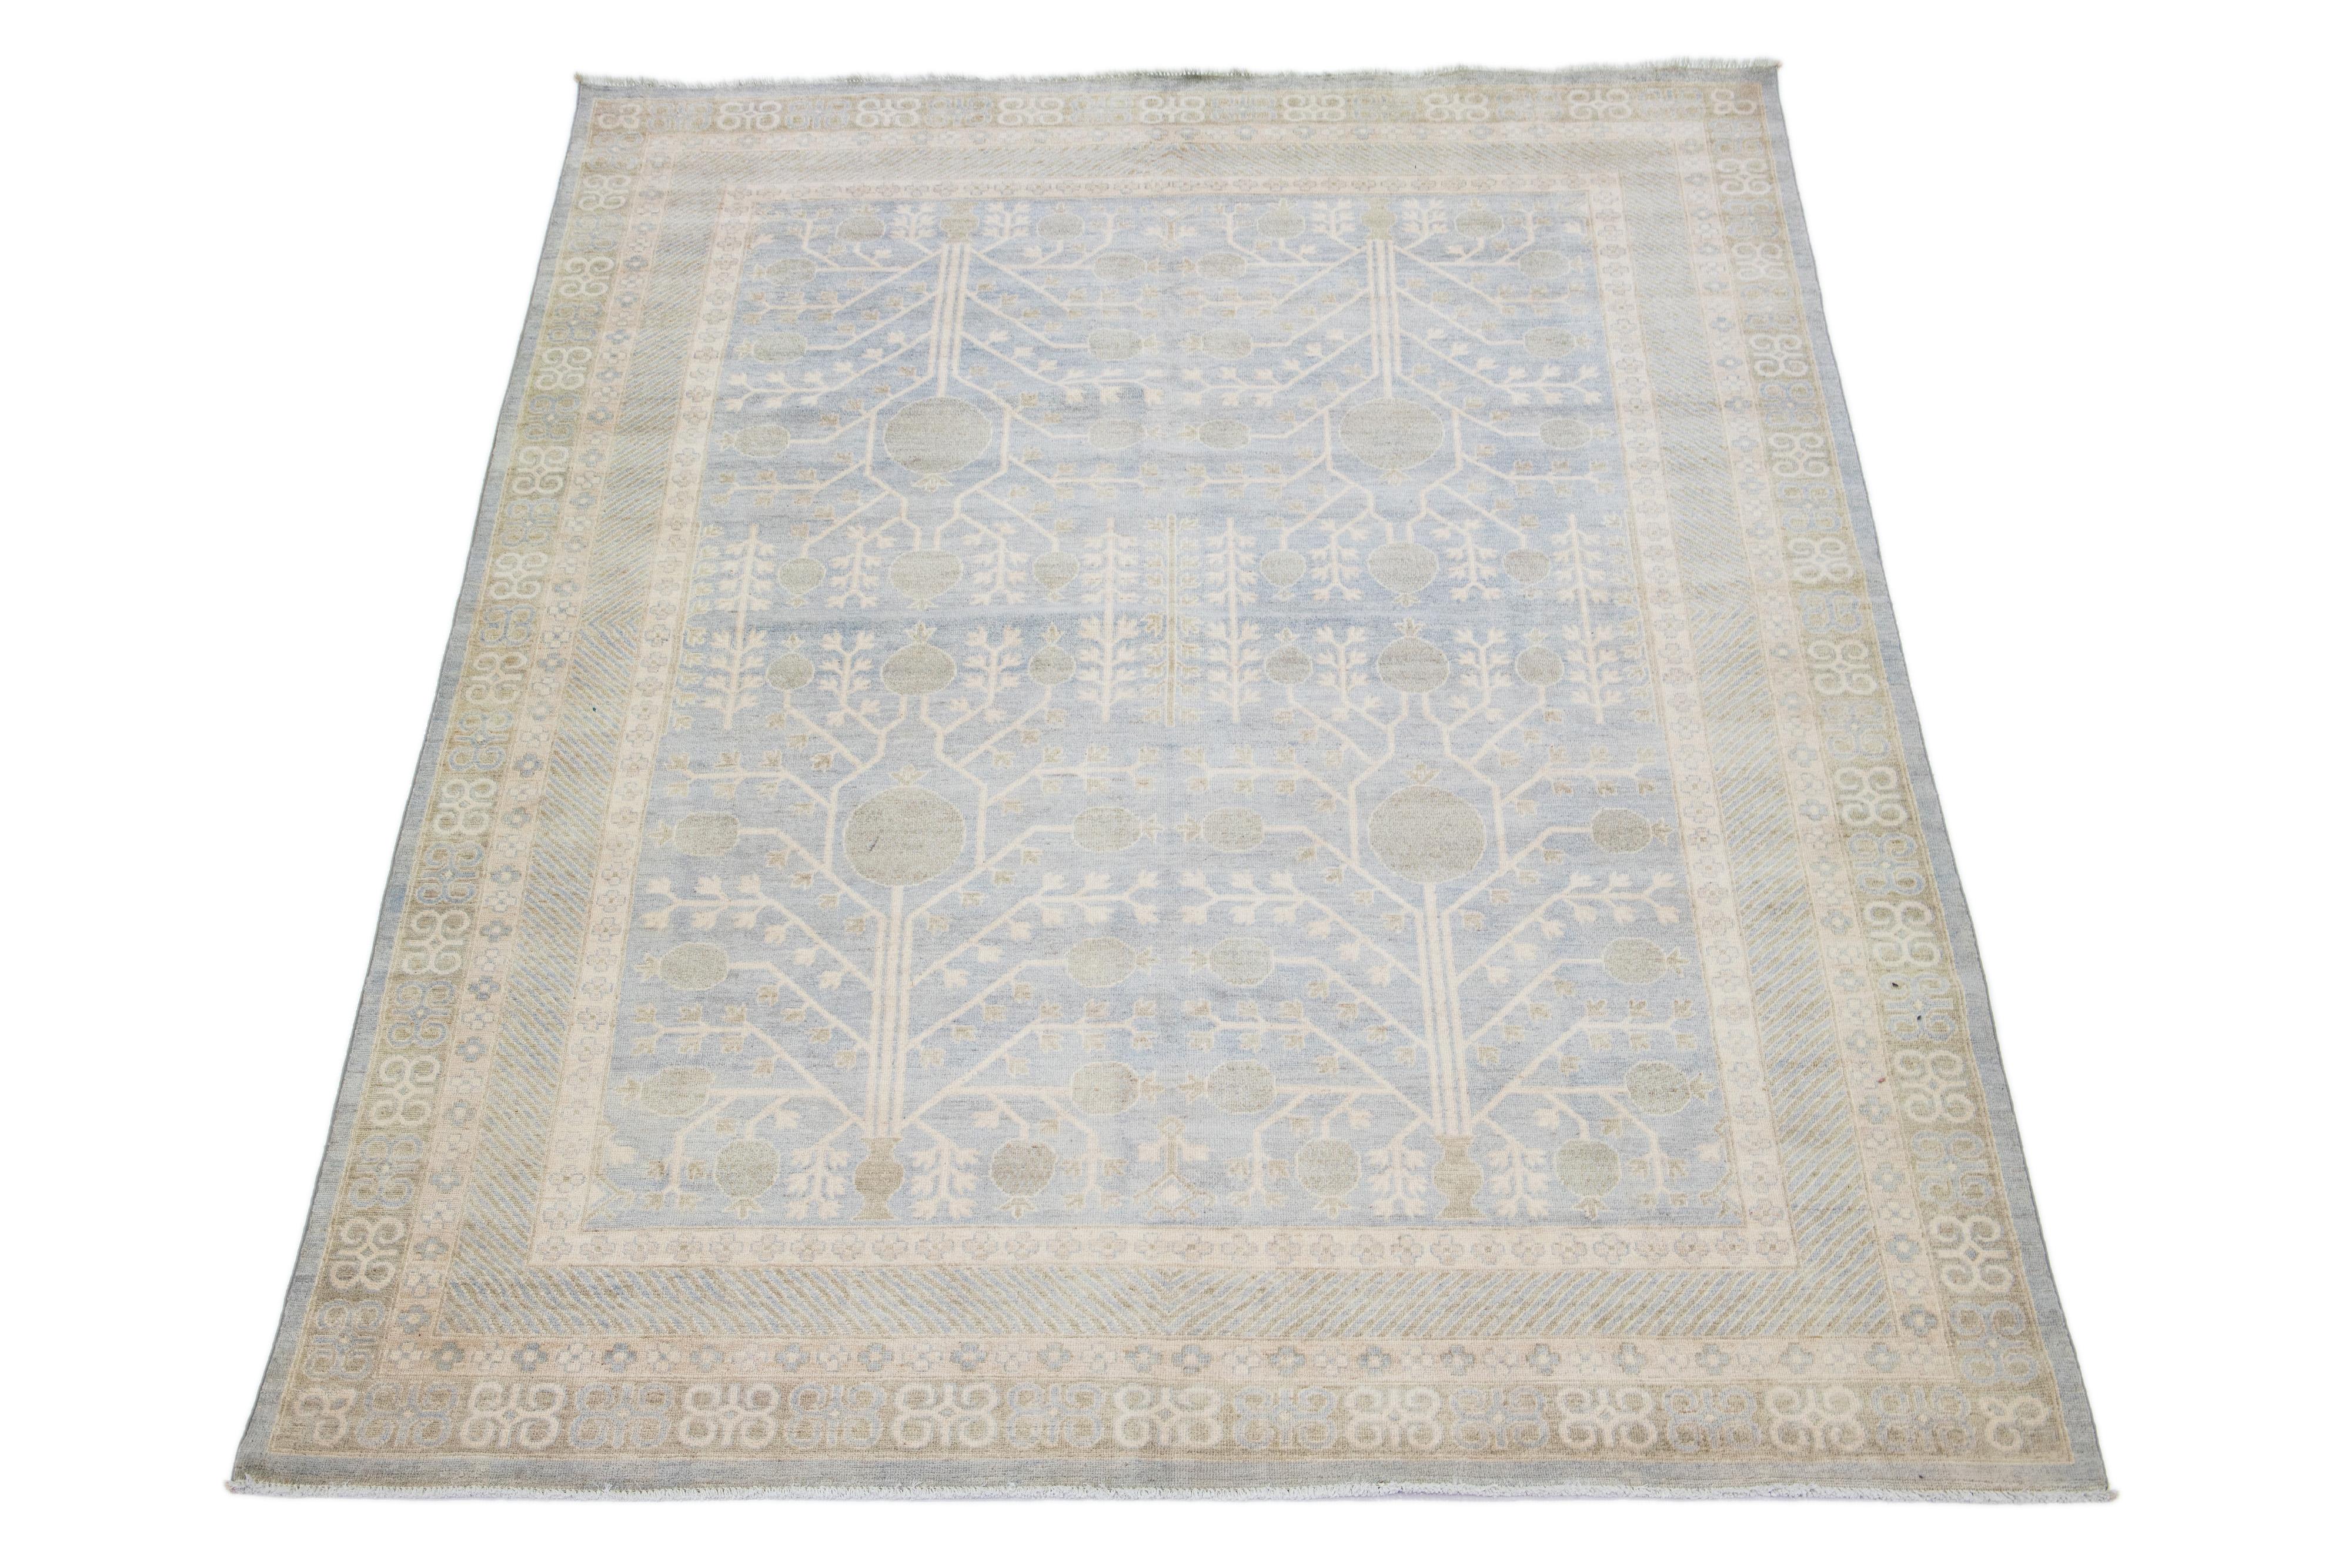 Beautiful modern Khotan-Style hand-knotted wool rug with a gray field. This piece has a designed frame with green and beige accents in a gorgeous all-over pattern design.

This rug measures: 8'9